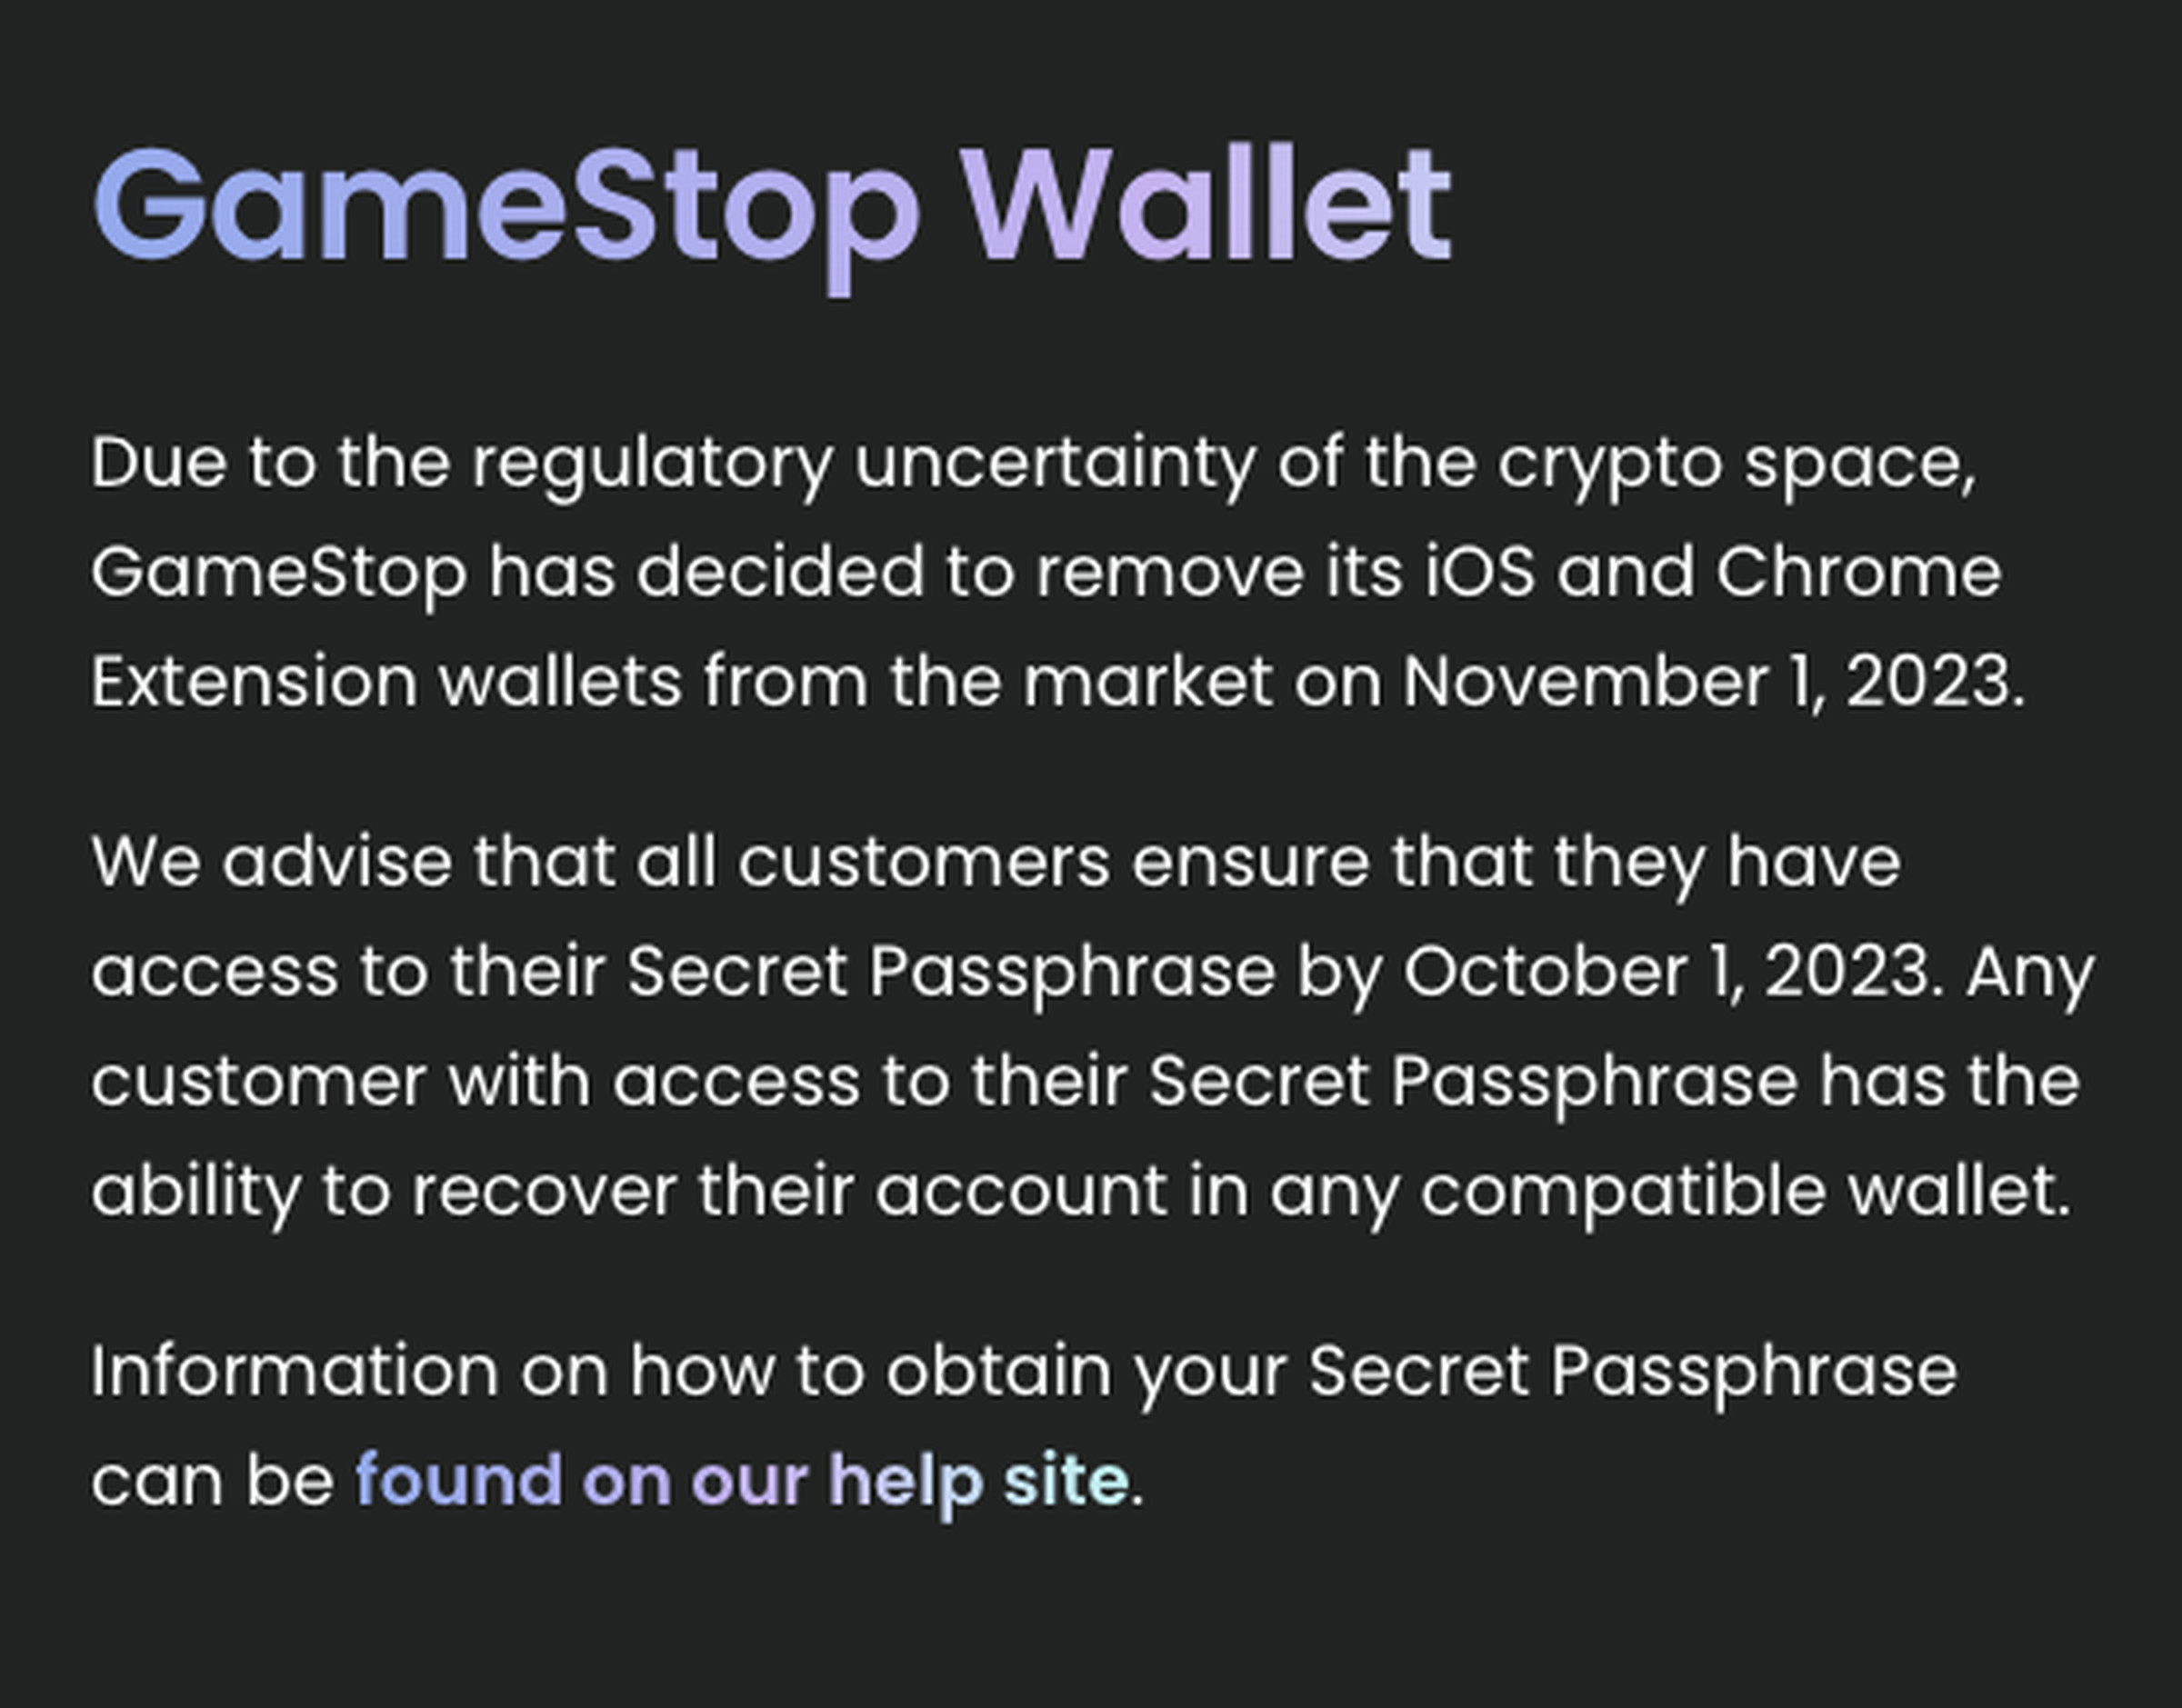 A GameStop notice that reads: “Due to the regulatory uncertainty of the crypto space, GameStop has decided to remove its iOS and Chrome Extension wallets from the market on November 1, 2023. We advise that all customers ensure that they have access to their Secret Passphrase by October 1, 2023. Any customer with access to their Secret Passphrase has the ability to recover their account in any compatible wallet. Information on how to obtain your Secret Passphrase can be found on our help site.”